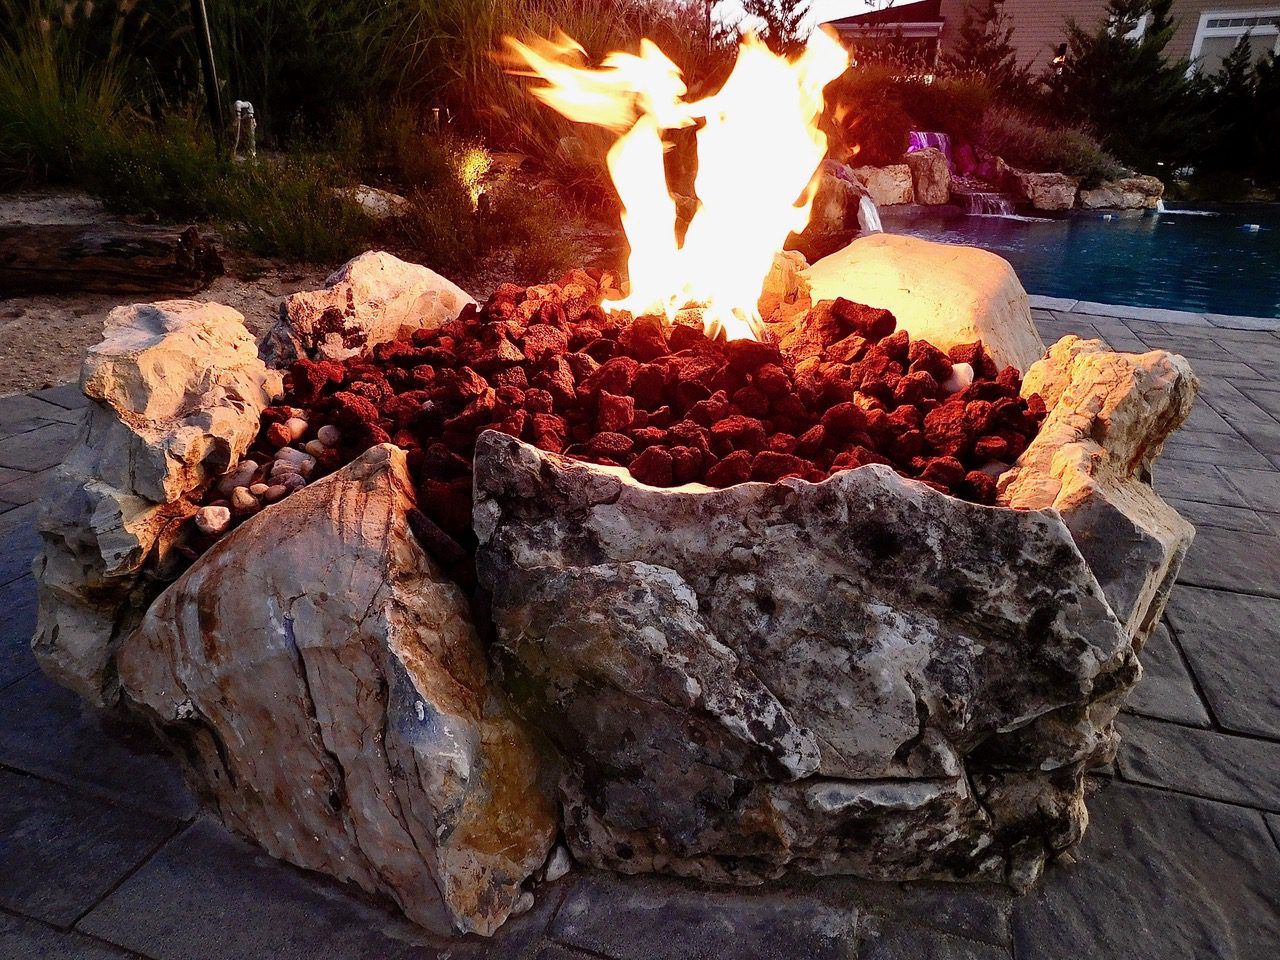 A fire pit with rocks and flames in it.